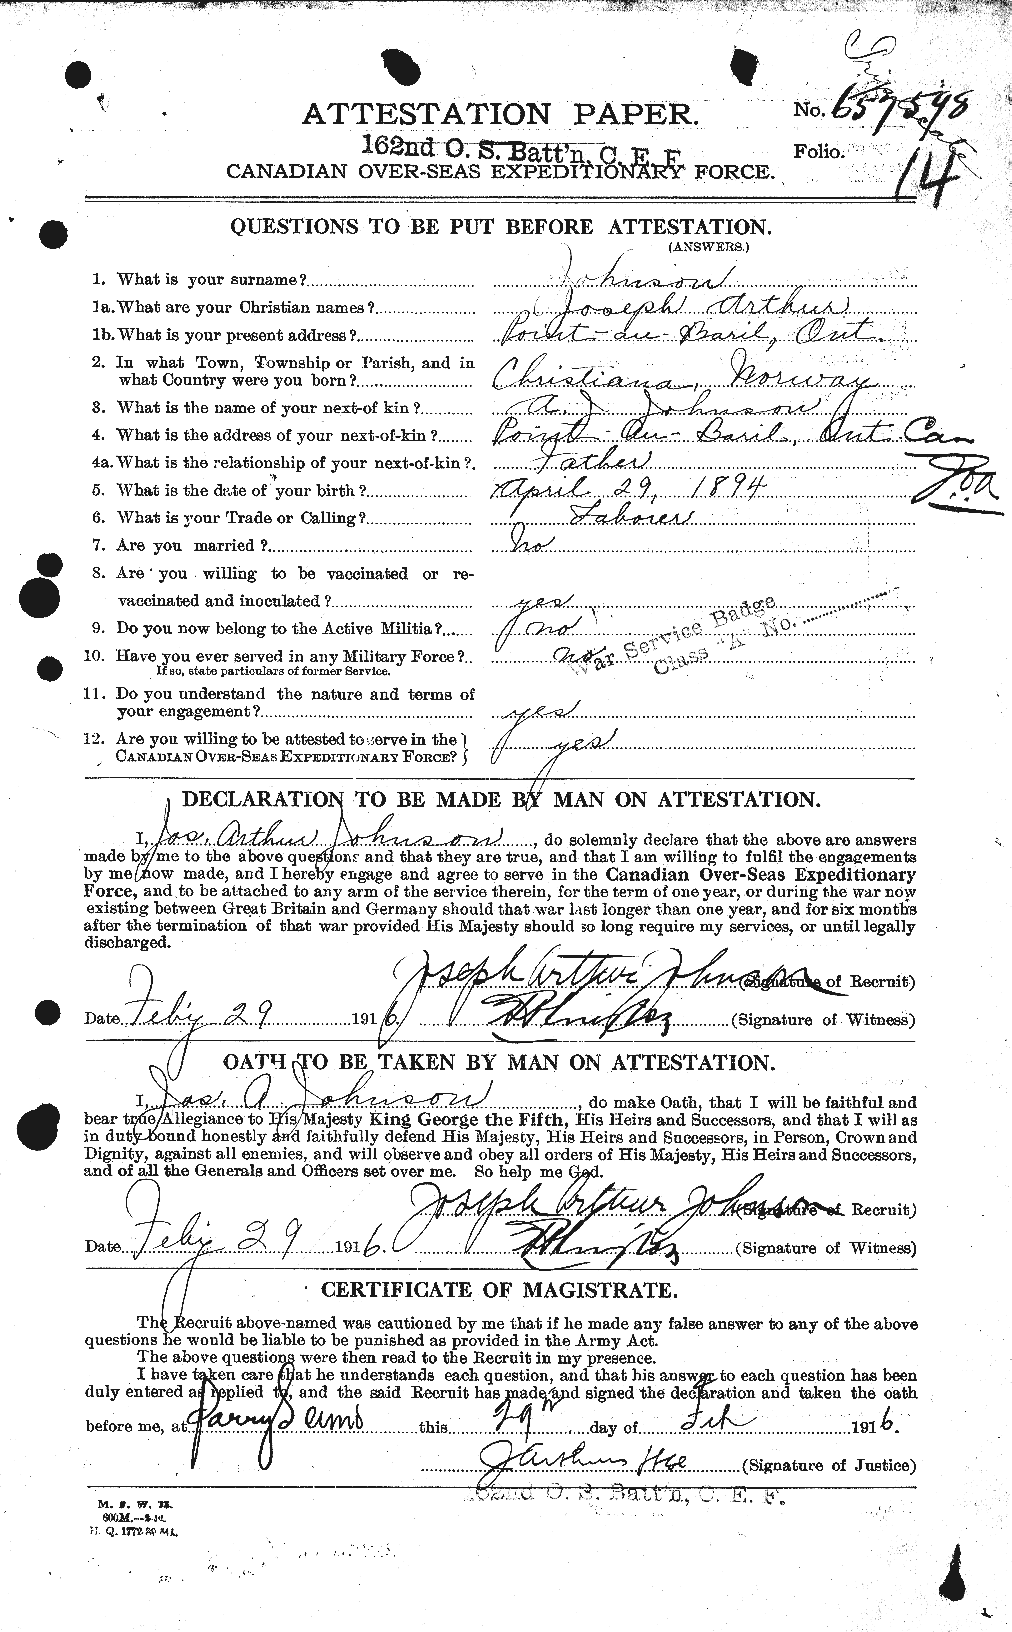 Personnel Records of the First World War - CEF 422024a